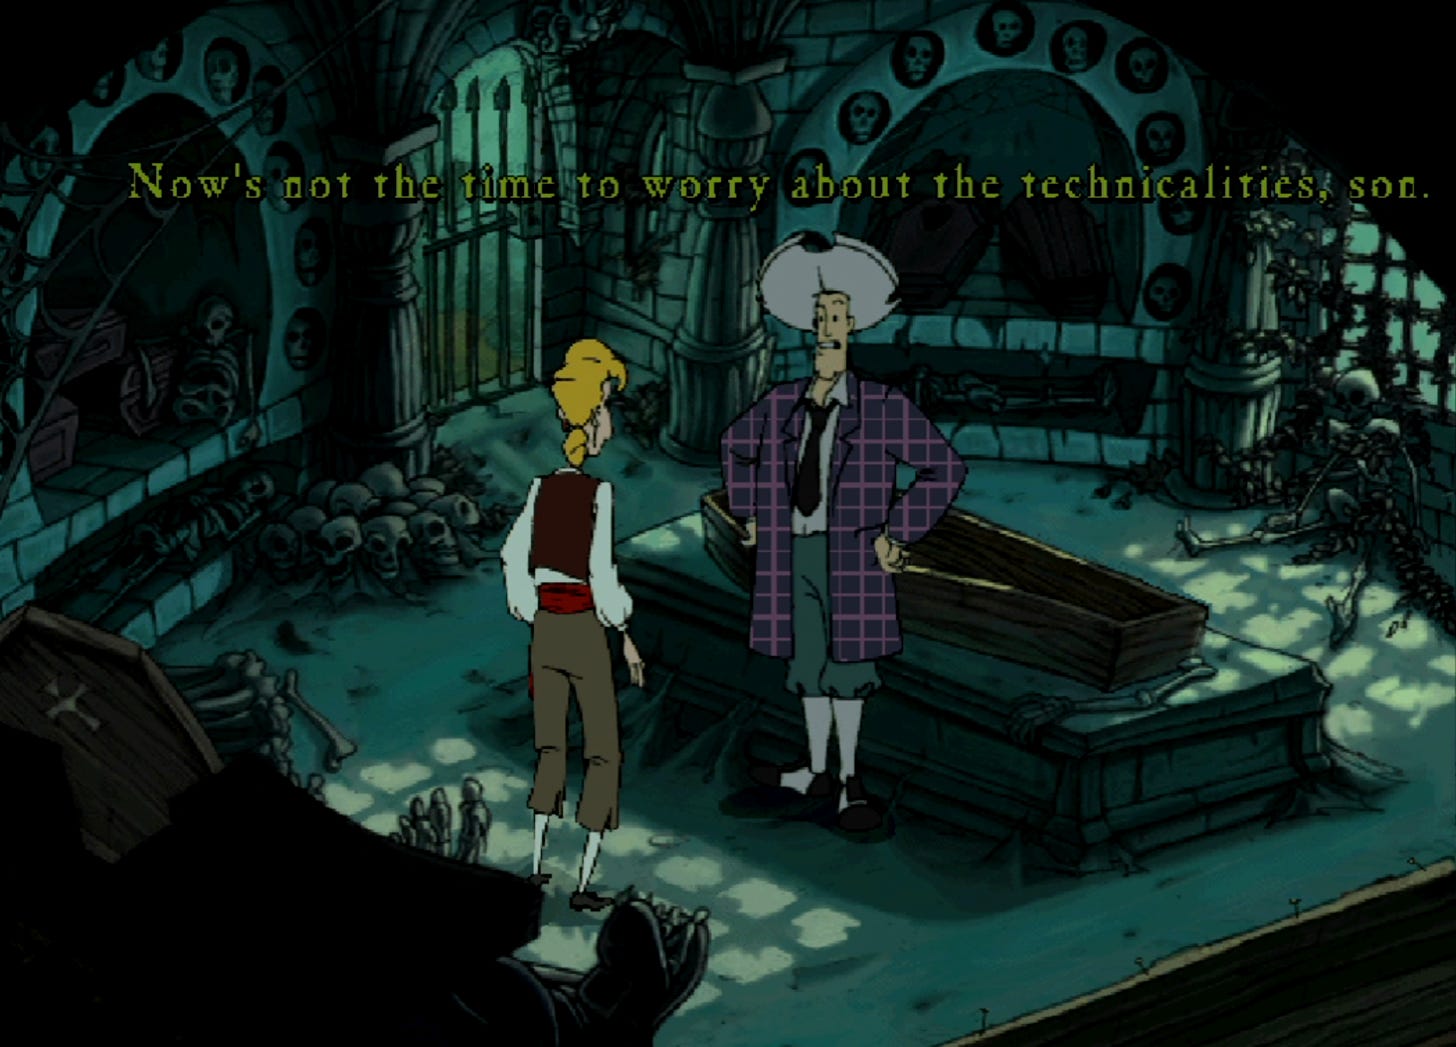 Stan to Guybrush, on the former's life insurance business: "Now's not the time to worry about the technicalities, son."